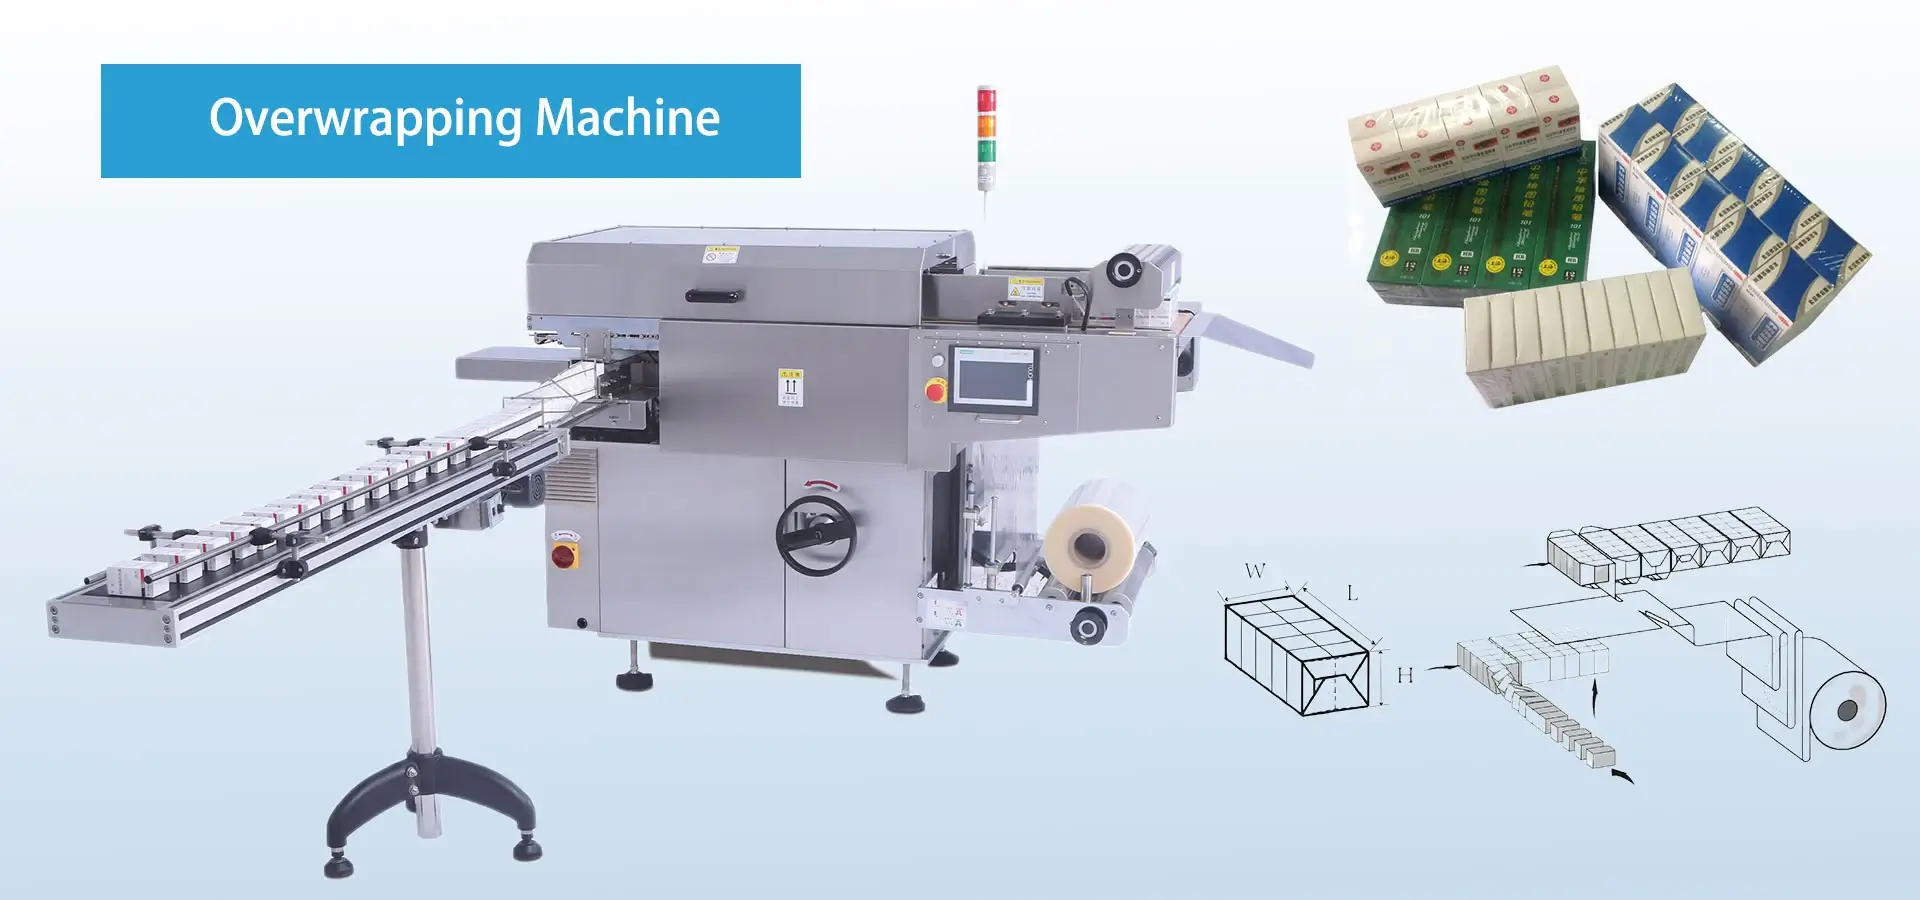 Overwrapping Machine - Manufacturers in China